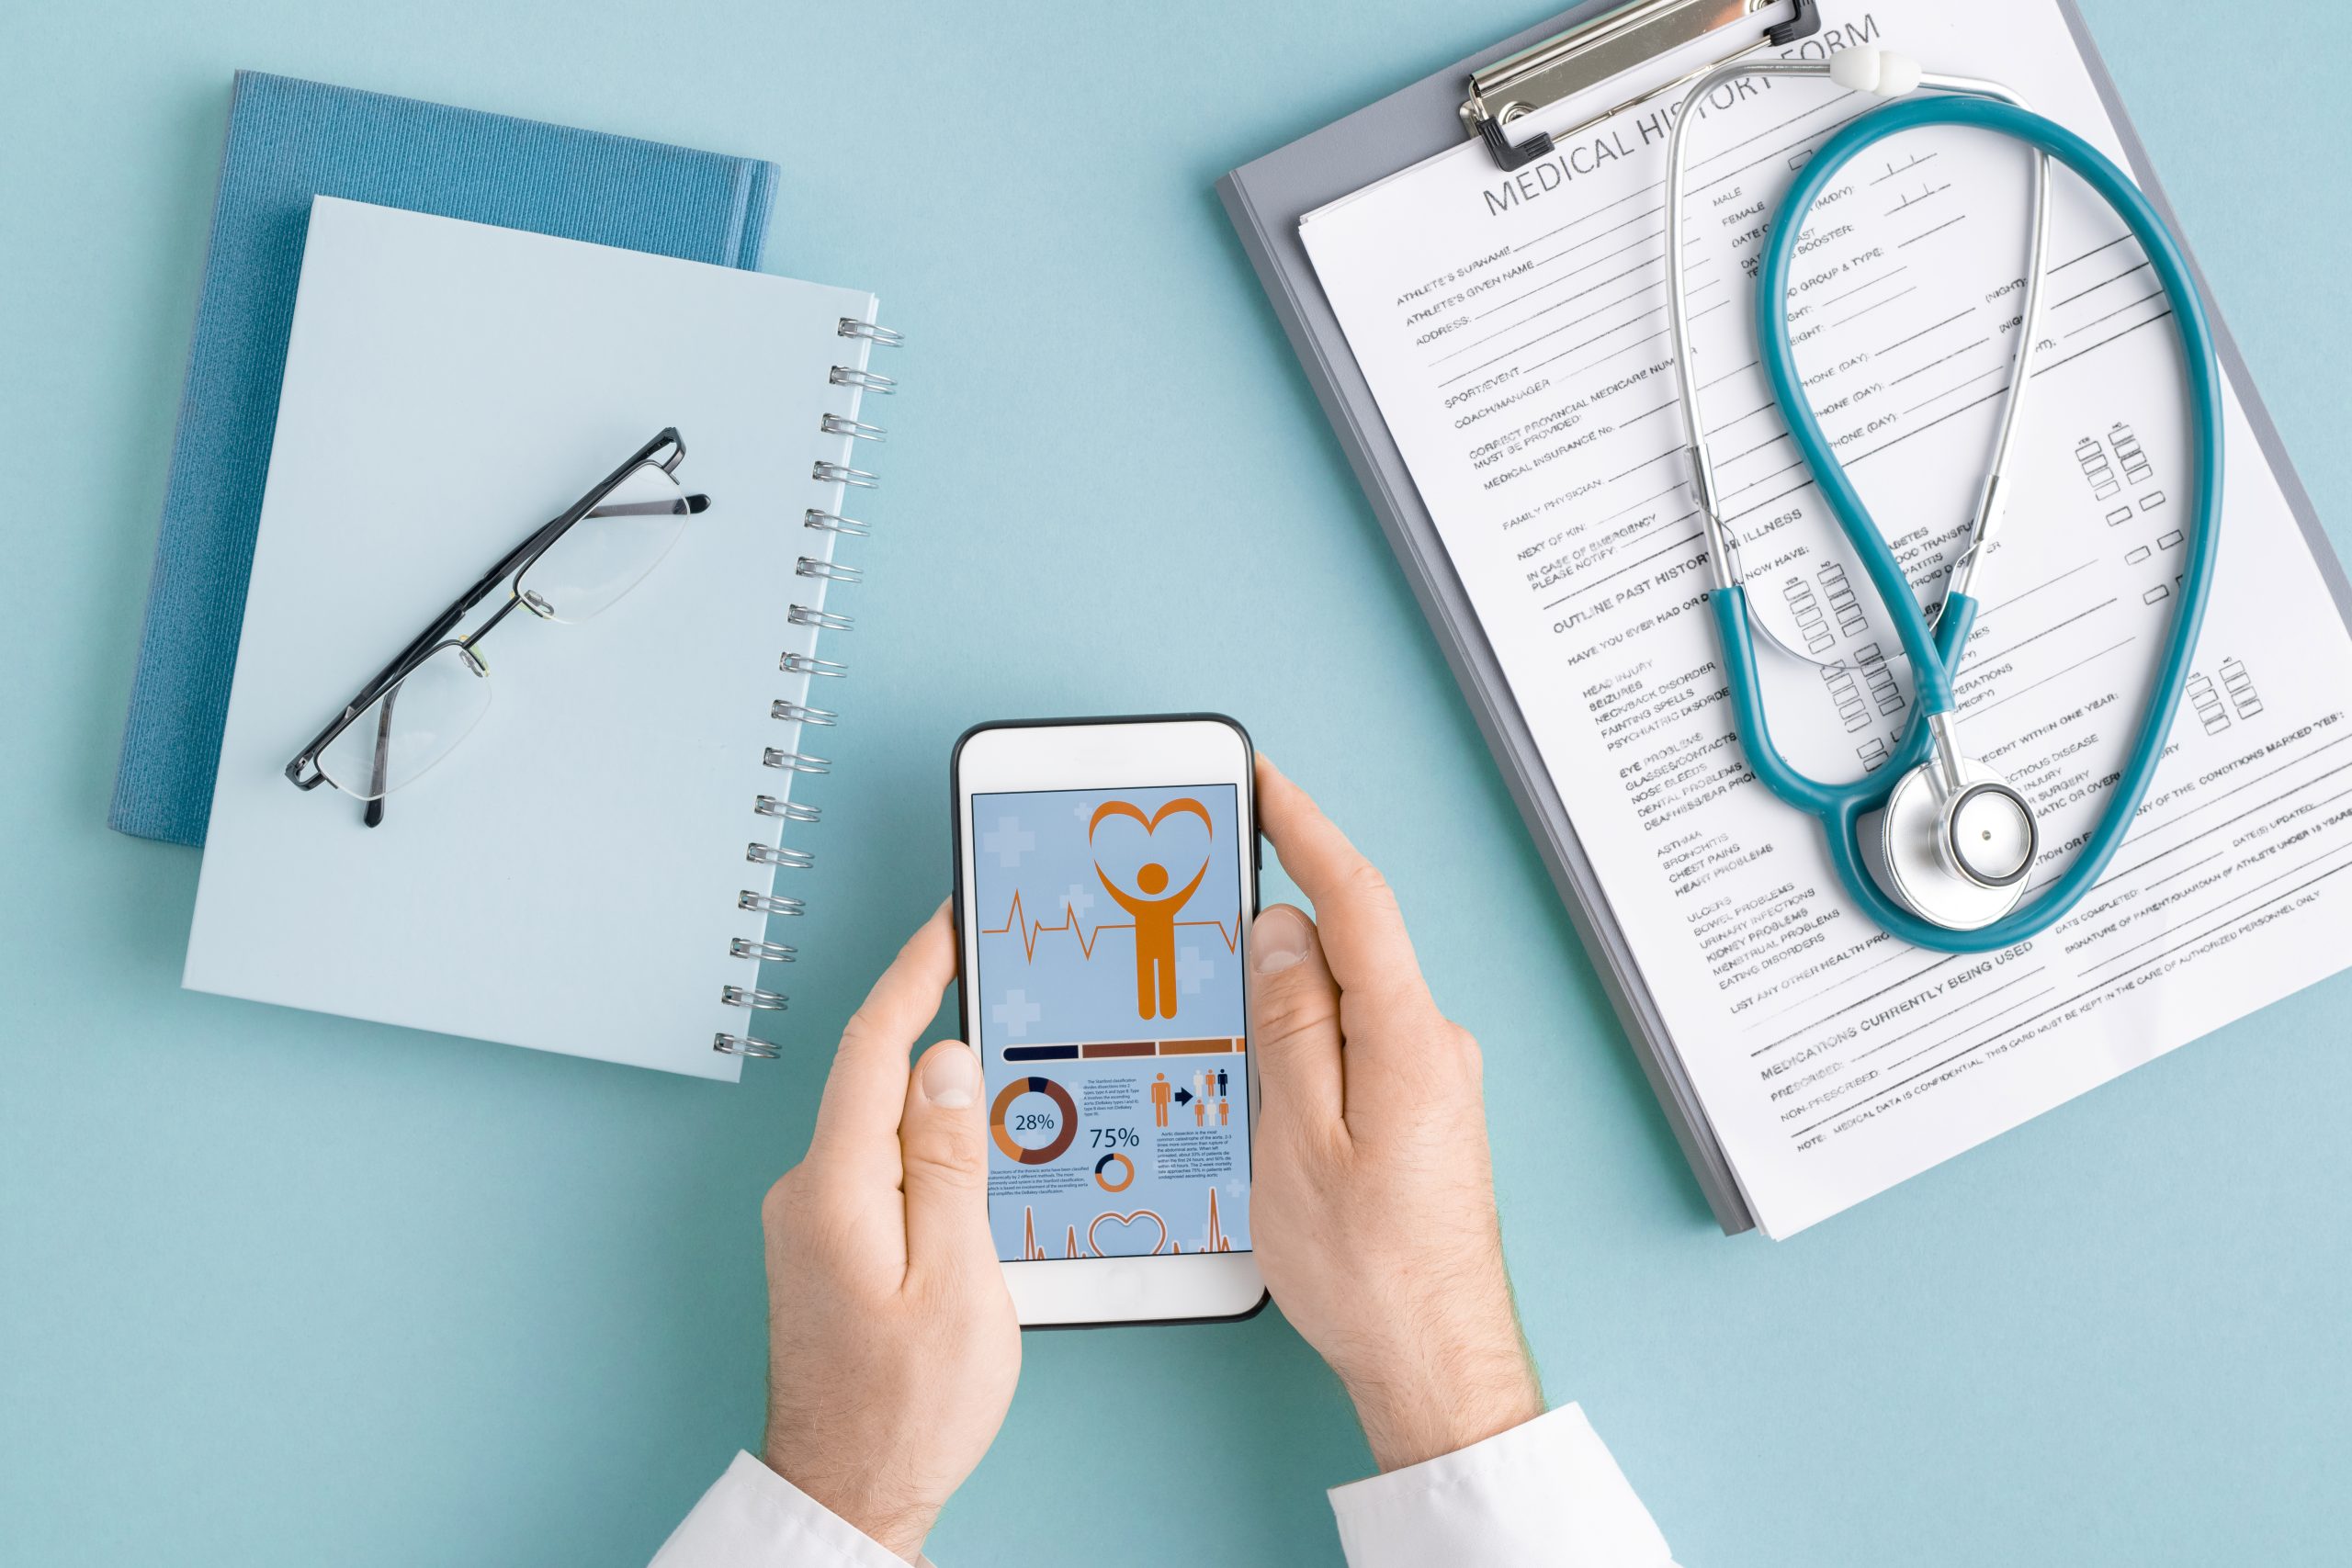 bsv-launches-smart-mobile-app-for-adverse-event-reporting-to-improve-patient-care